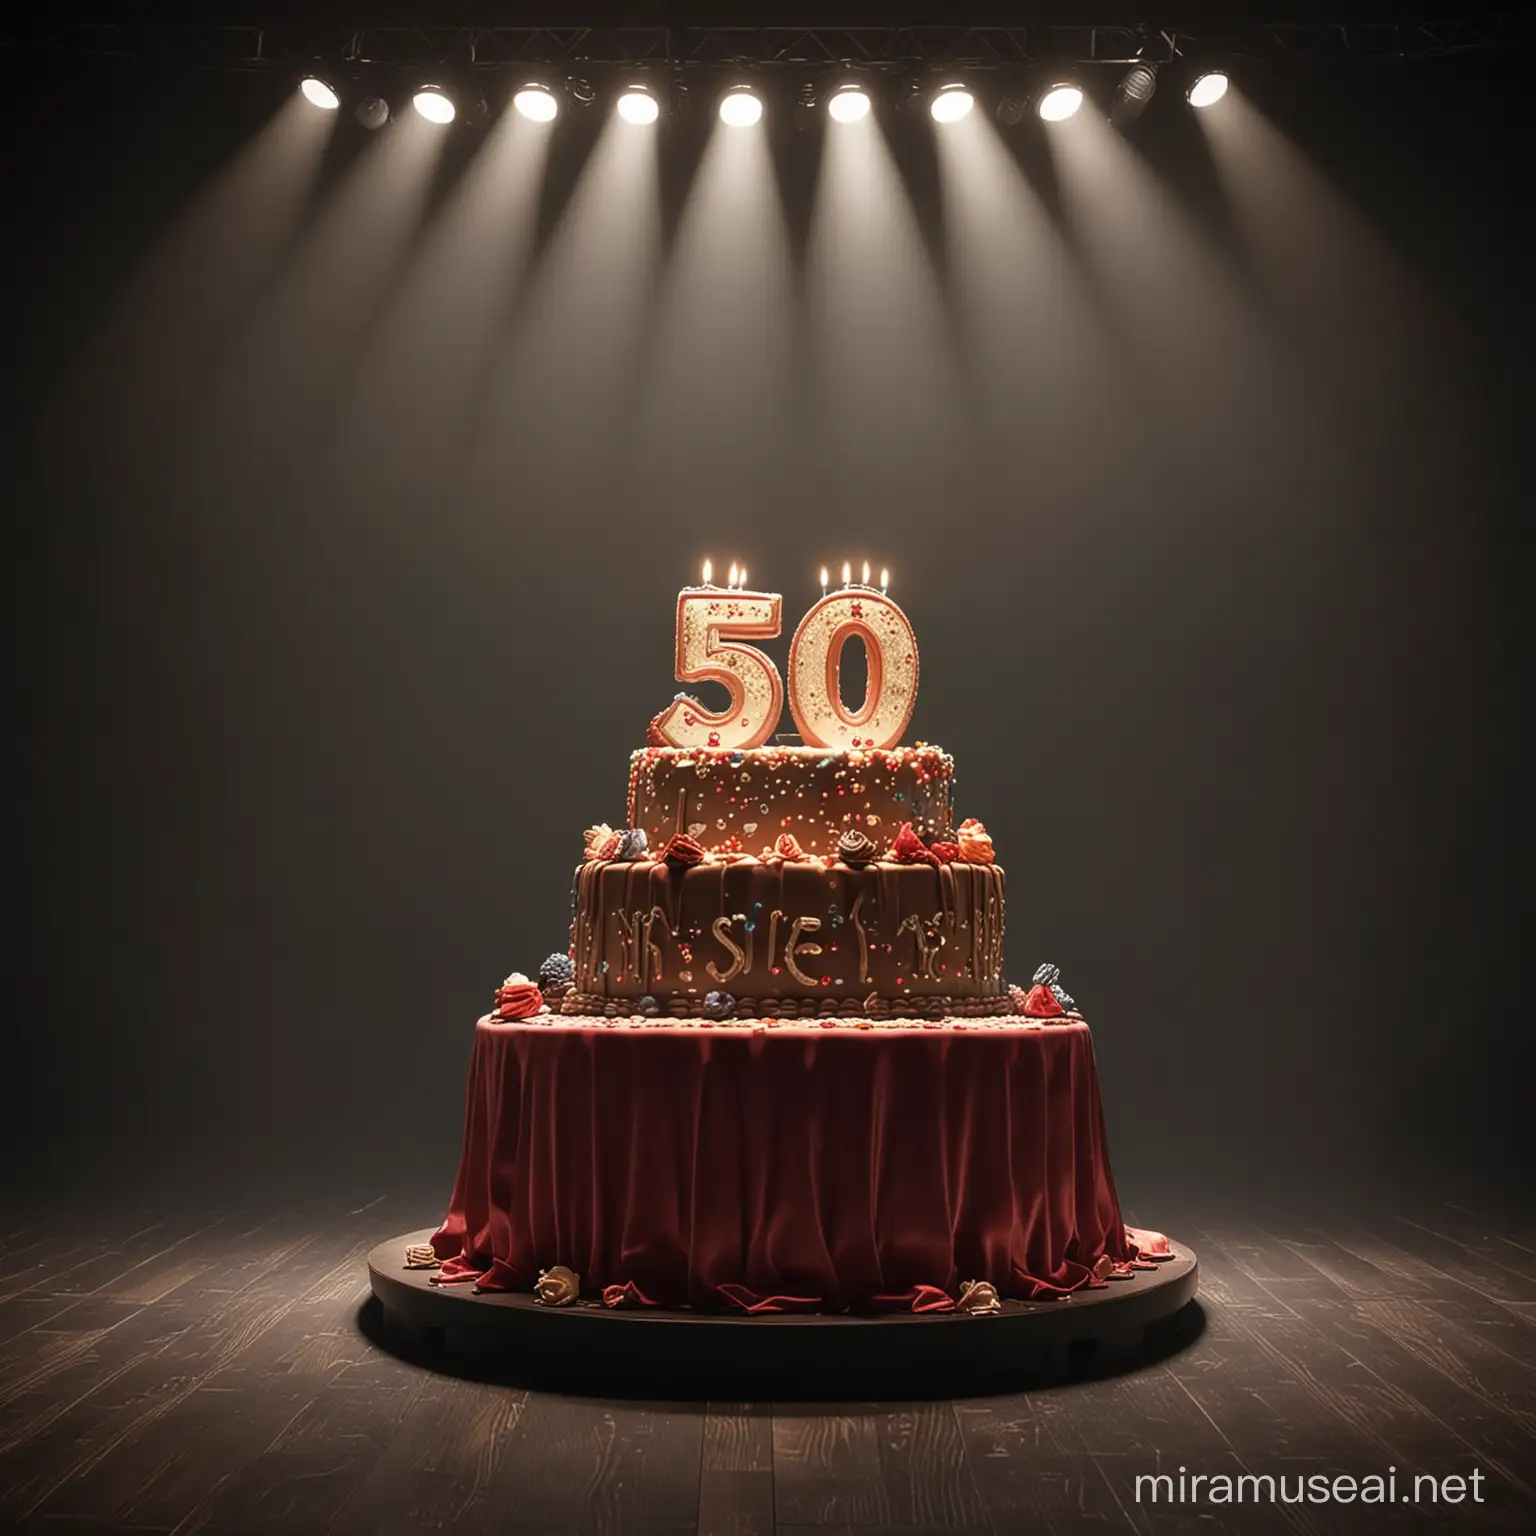 There is a birthday cake on a table on an empty and luxurious theater stage. The number 50 written large on the cake attracts attention. Spotlights illuminate the table on dark stage